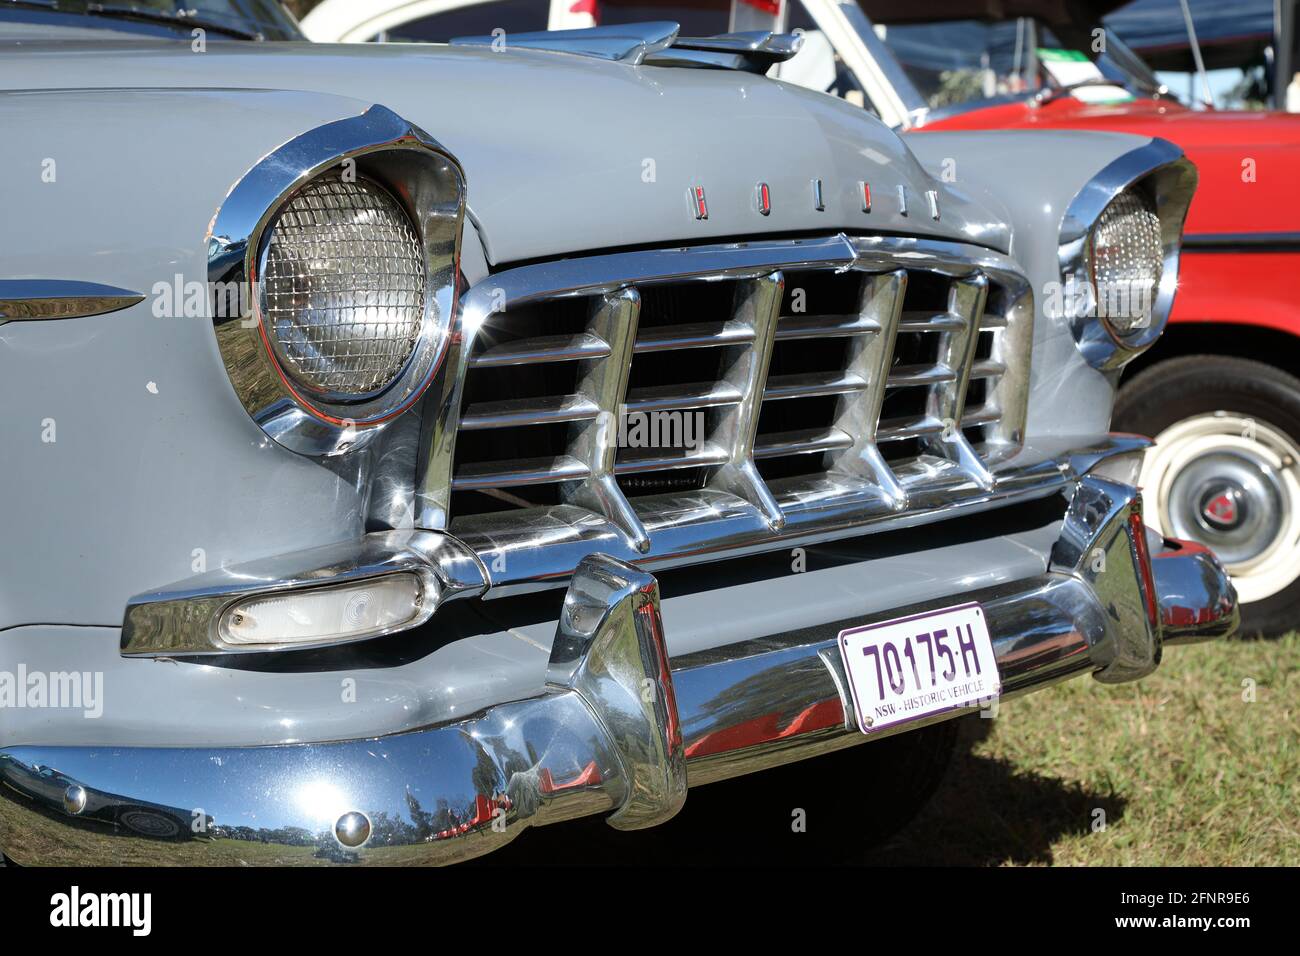 East Kurrajong, NSW, Australia - 16 May 2021. The front of a vintage Holden FC showing the detail of the grill, lights and bumper. Stock Photo